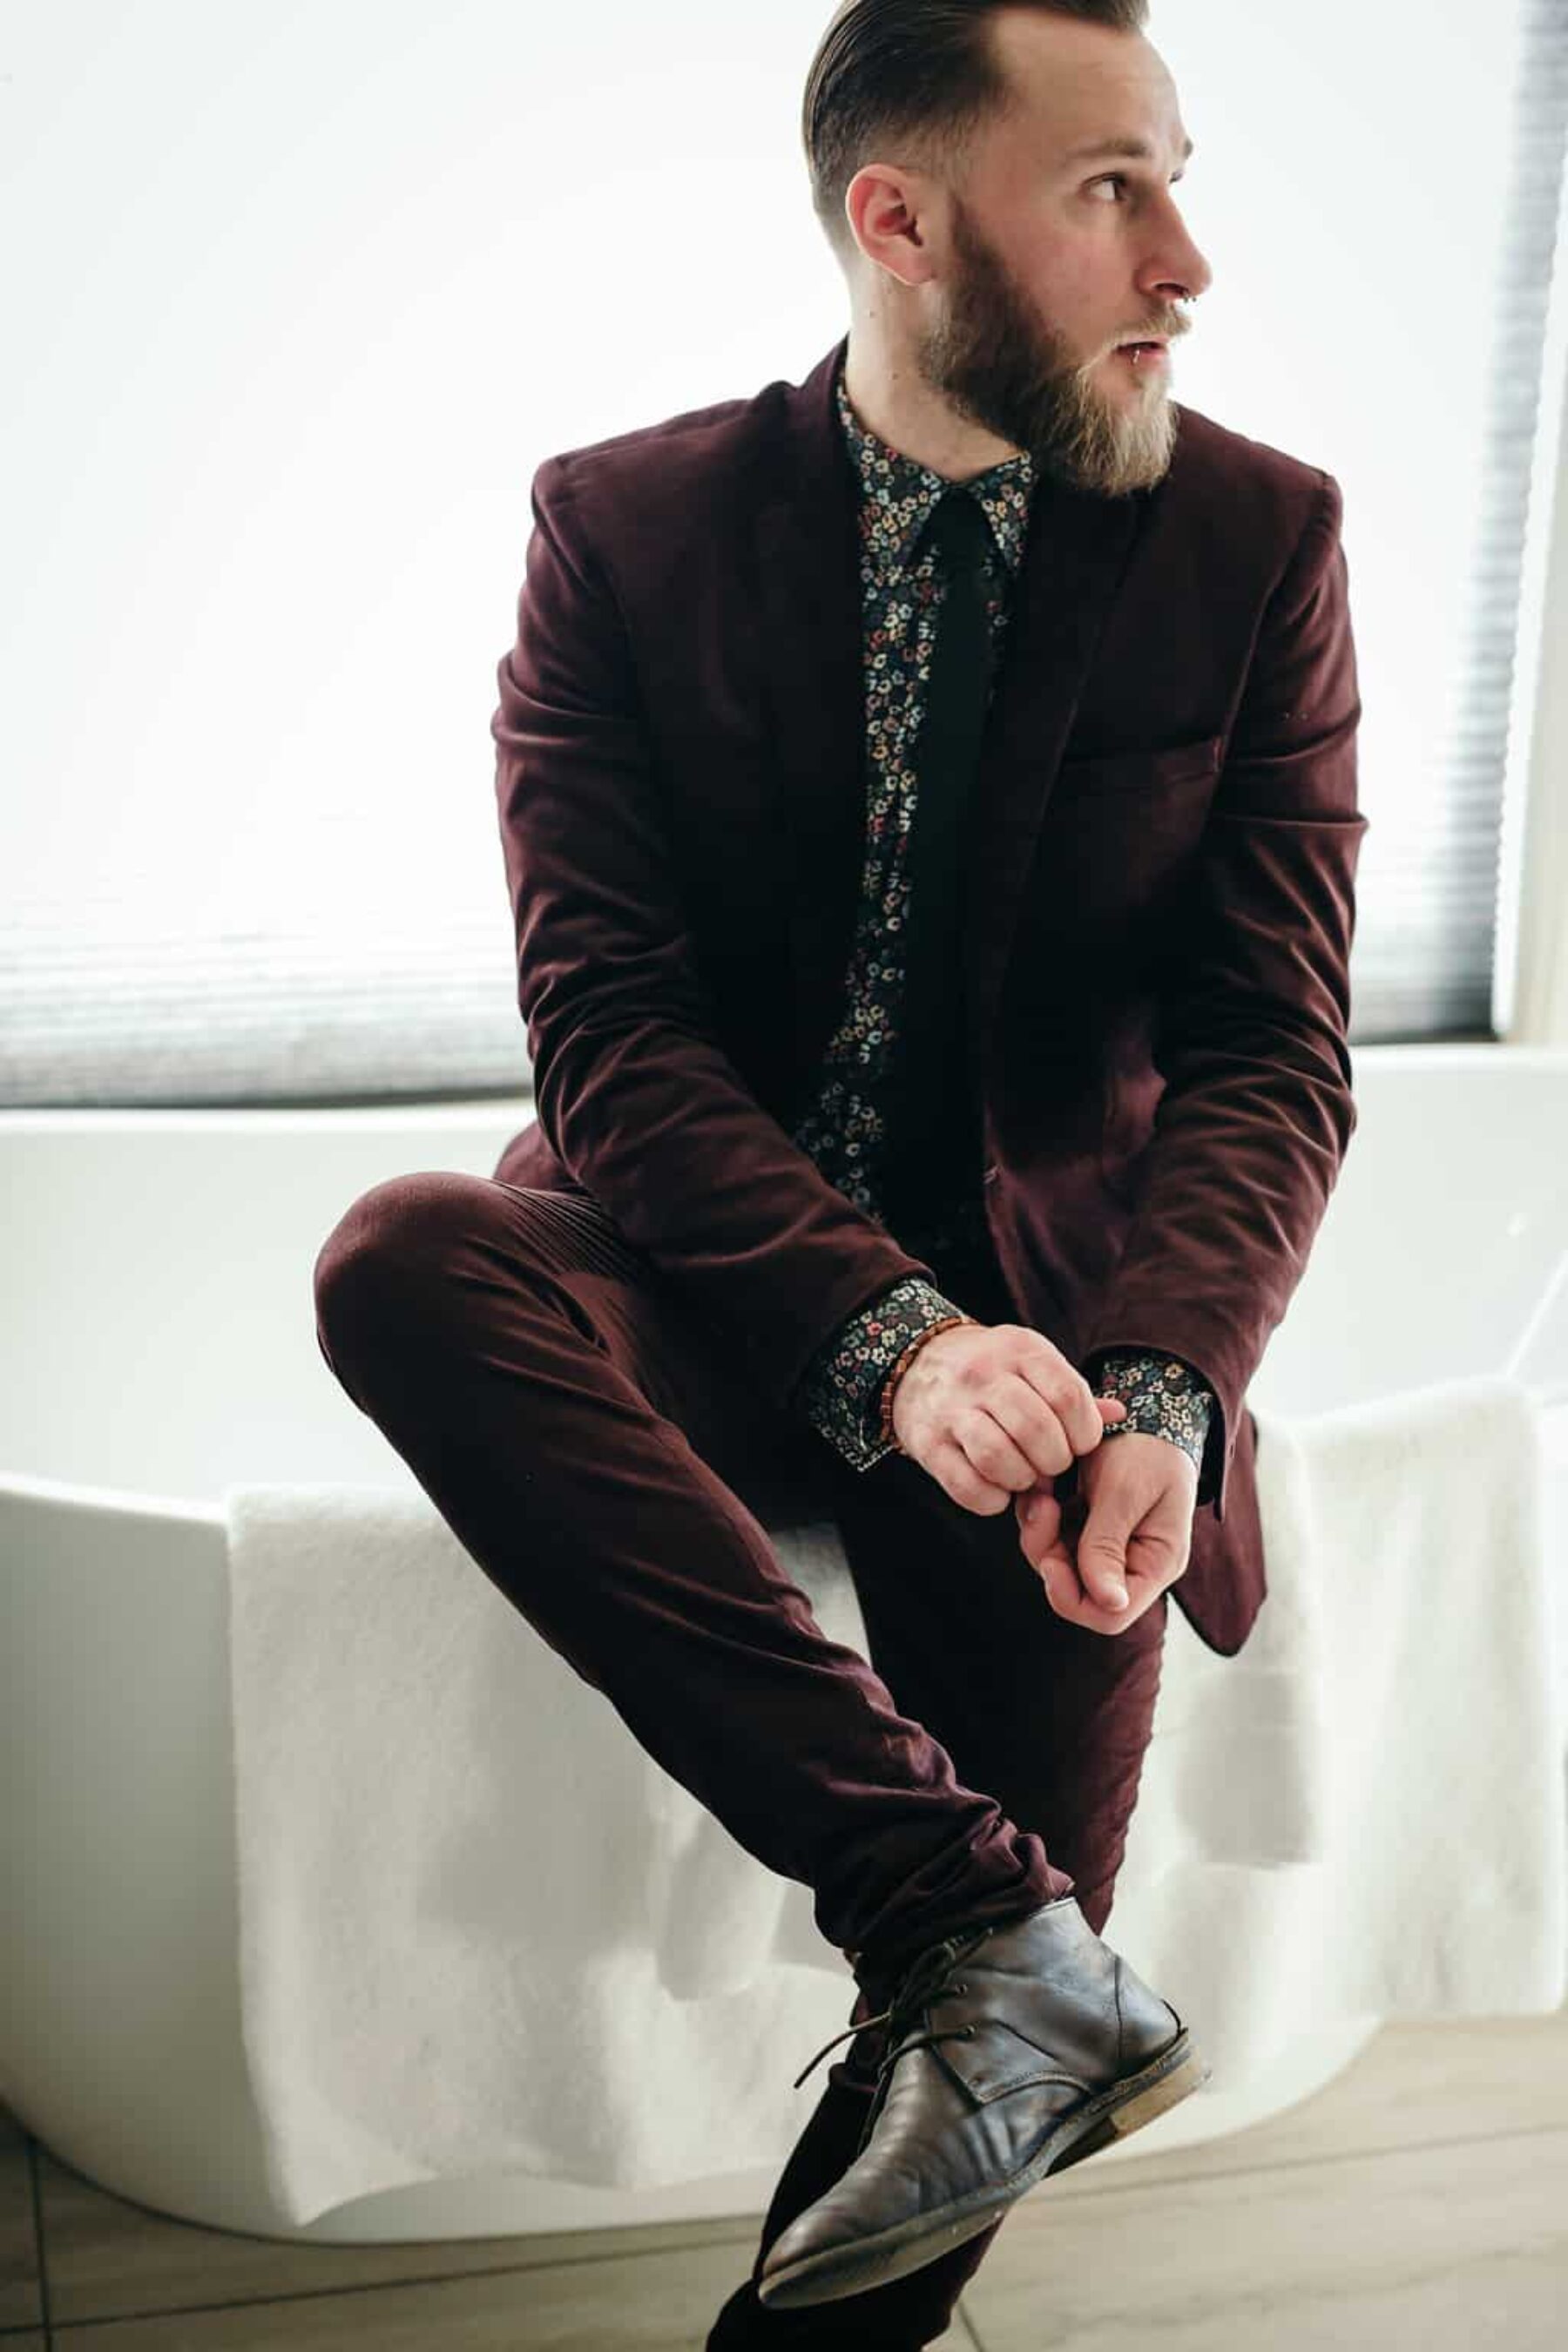 Groom in burgundy suit with floral shirt